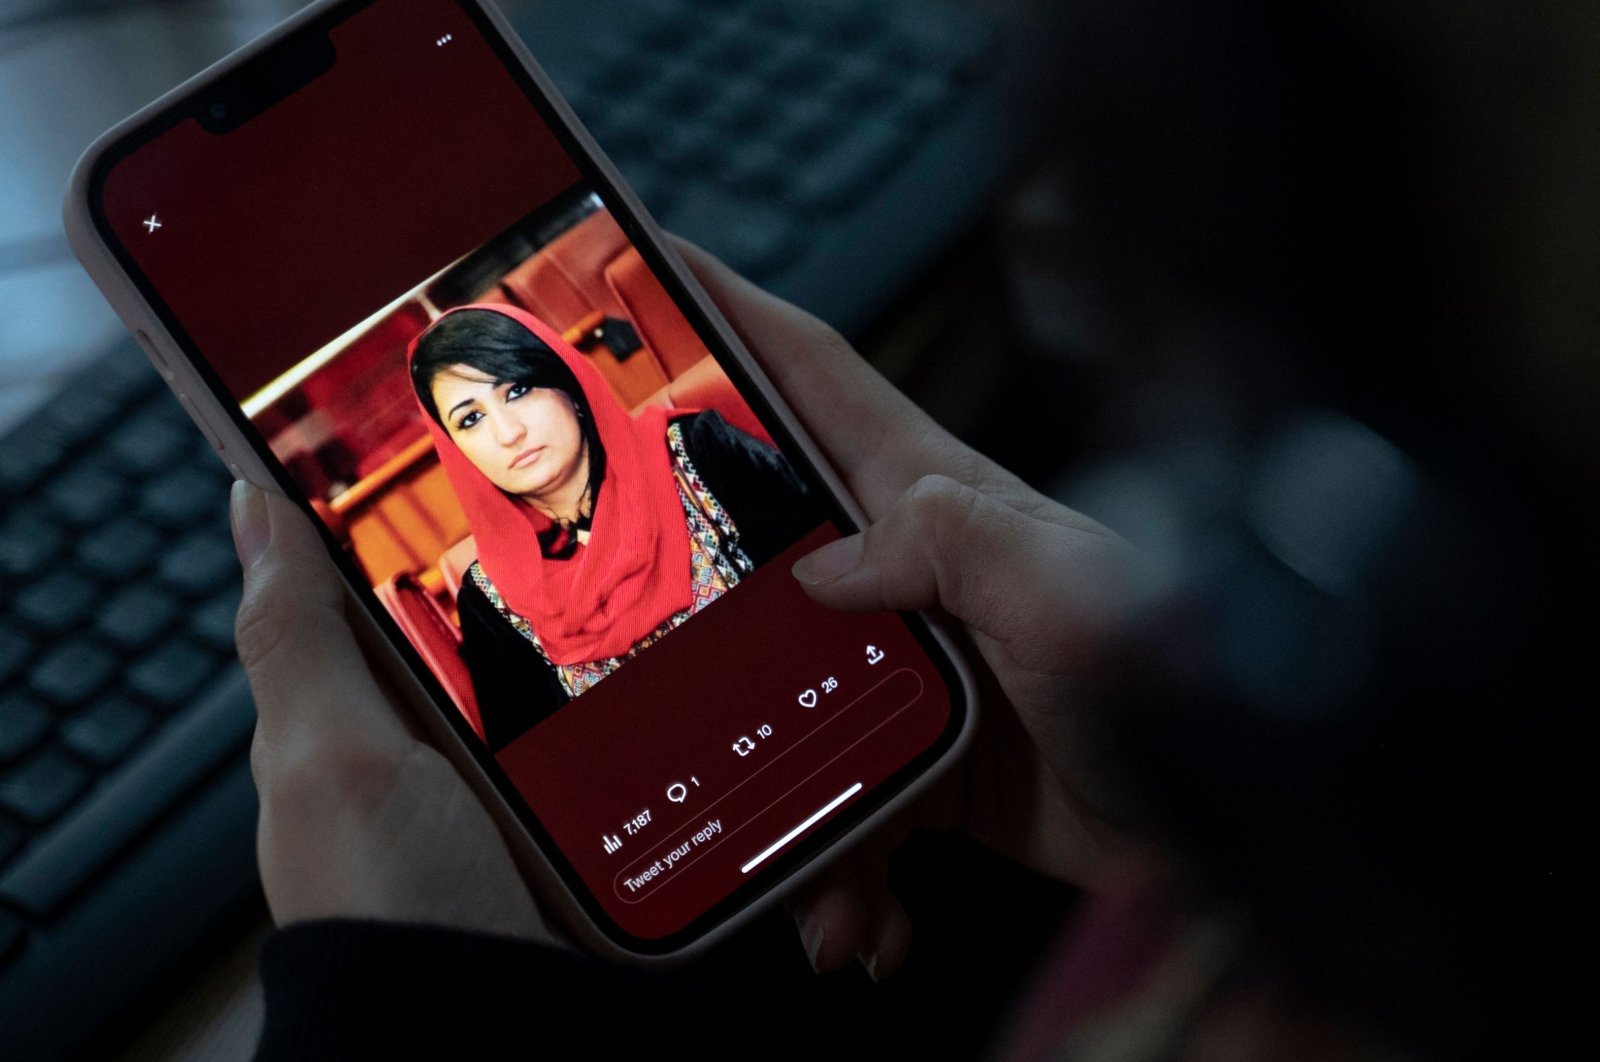 A woman looks at a picture of former Afghan lawmaker Mursal Nabizada on her mobile phone, who was shot dead by gunmen last night at her house in Kabul, Afghanistan, Jan. 15, 2023. (AFP Photo)